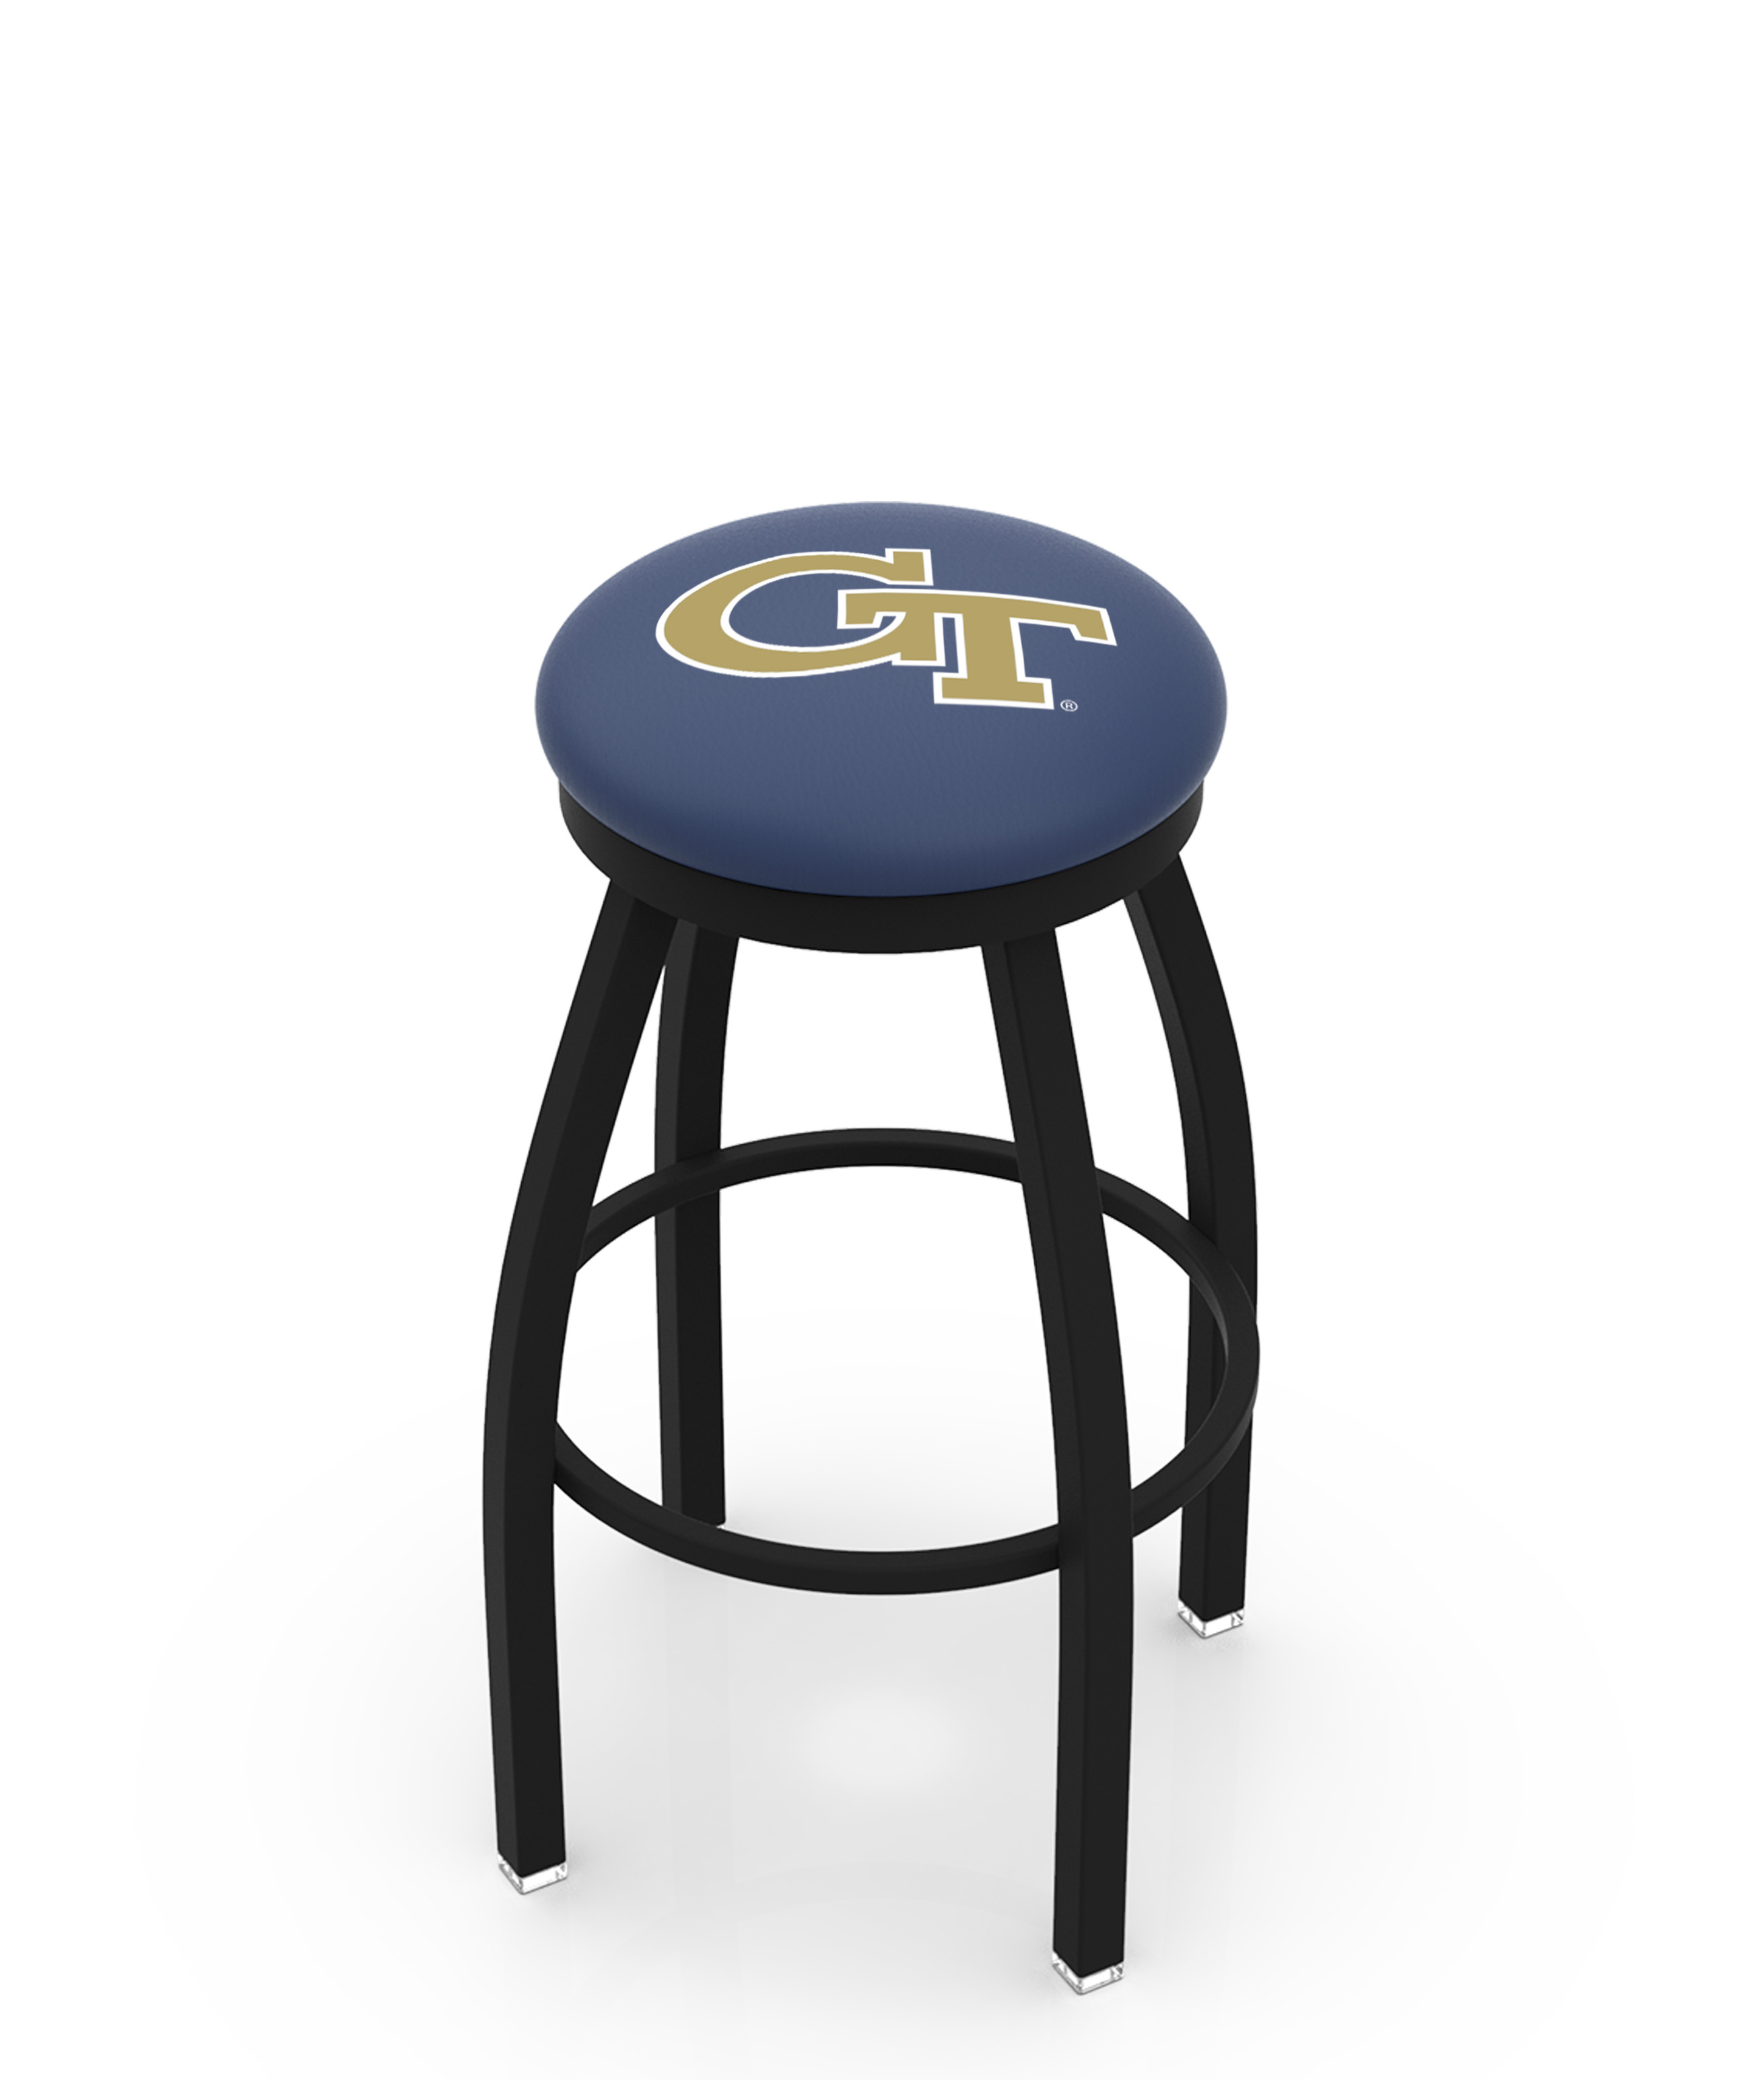 Picture of Holland Bar Stool L8B2B36GATech 36 in. Georgia Tech Bar Stool with Yellow Jackets Logo Swivel Seat